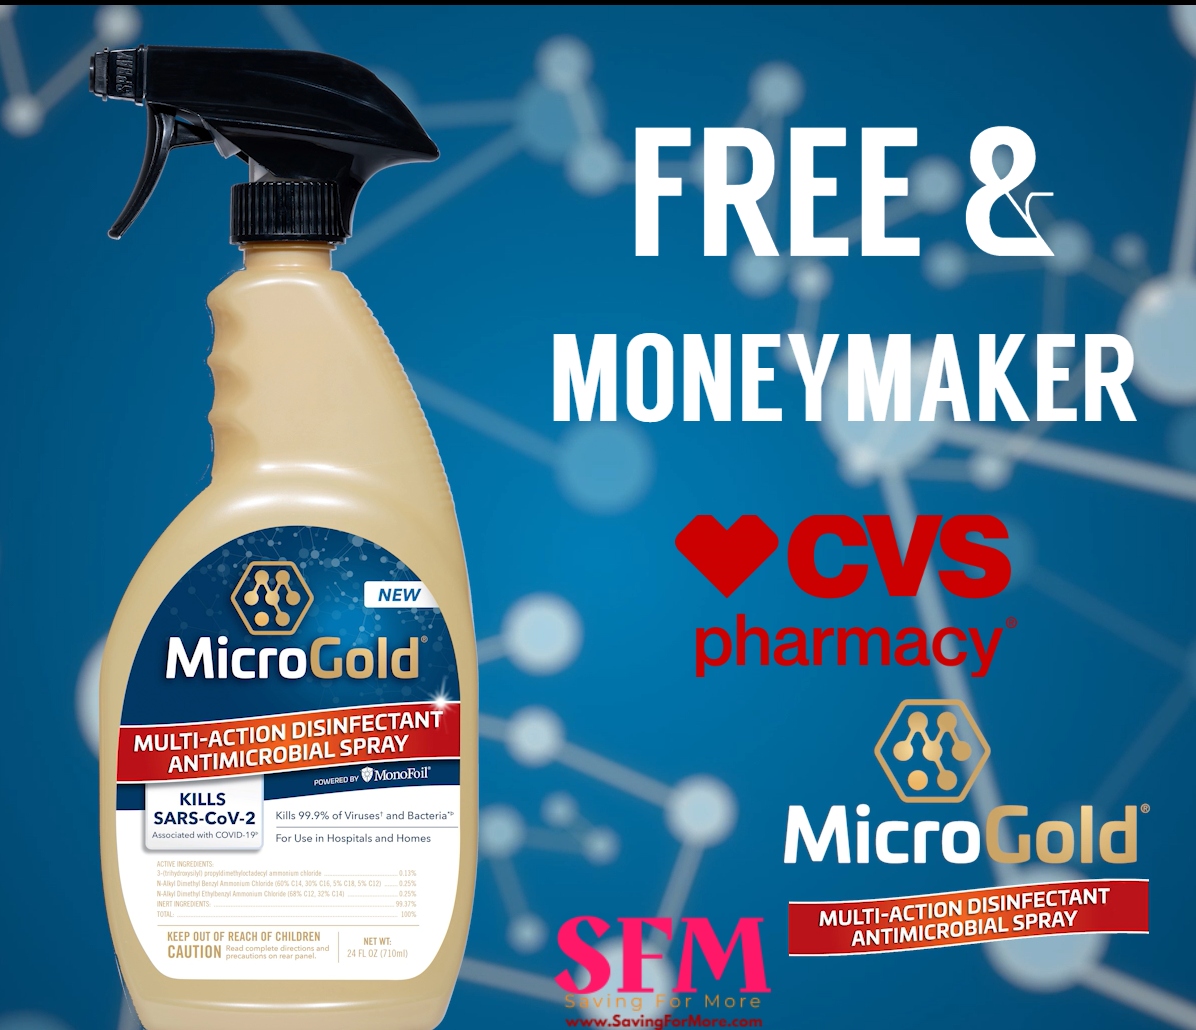 Free + Moneymaker MicroGold Multi-Action Disinfectant at CVS